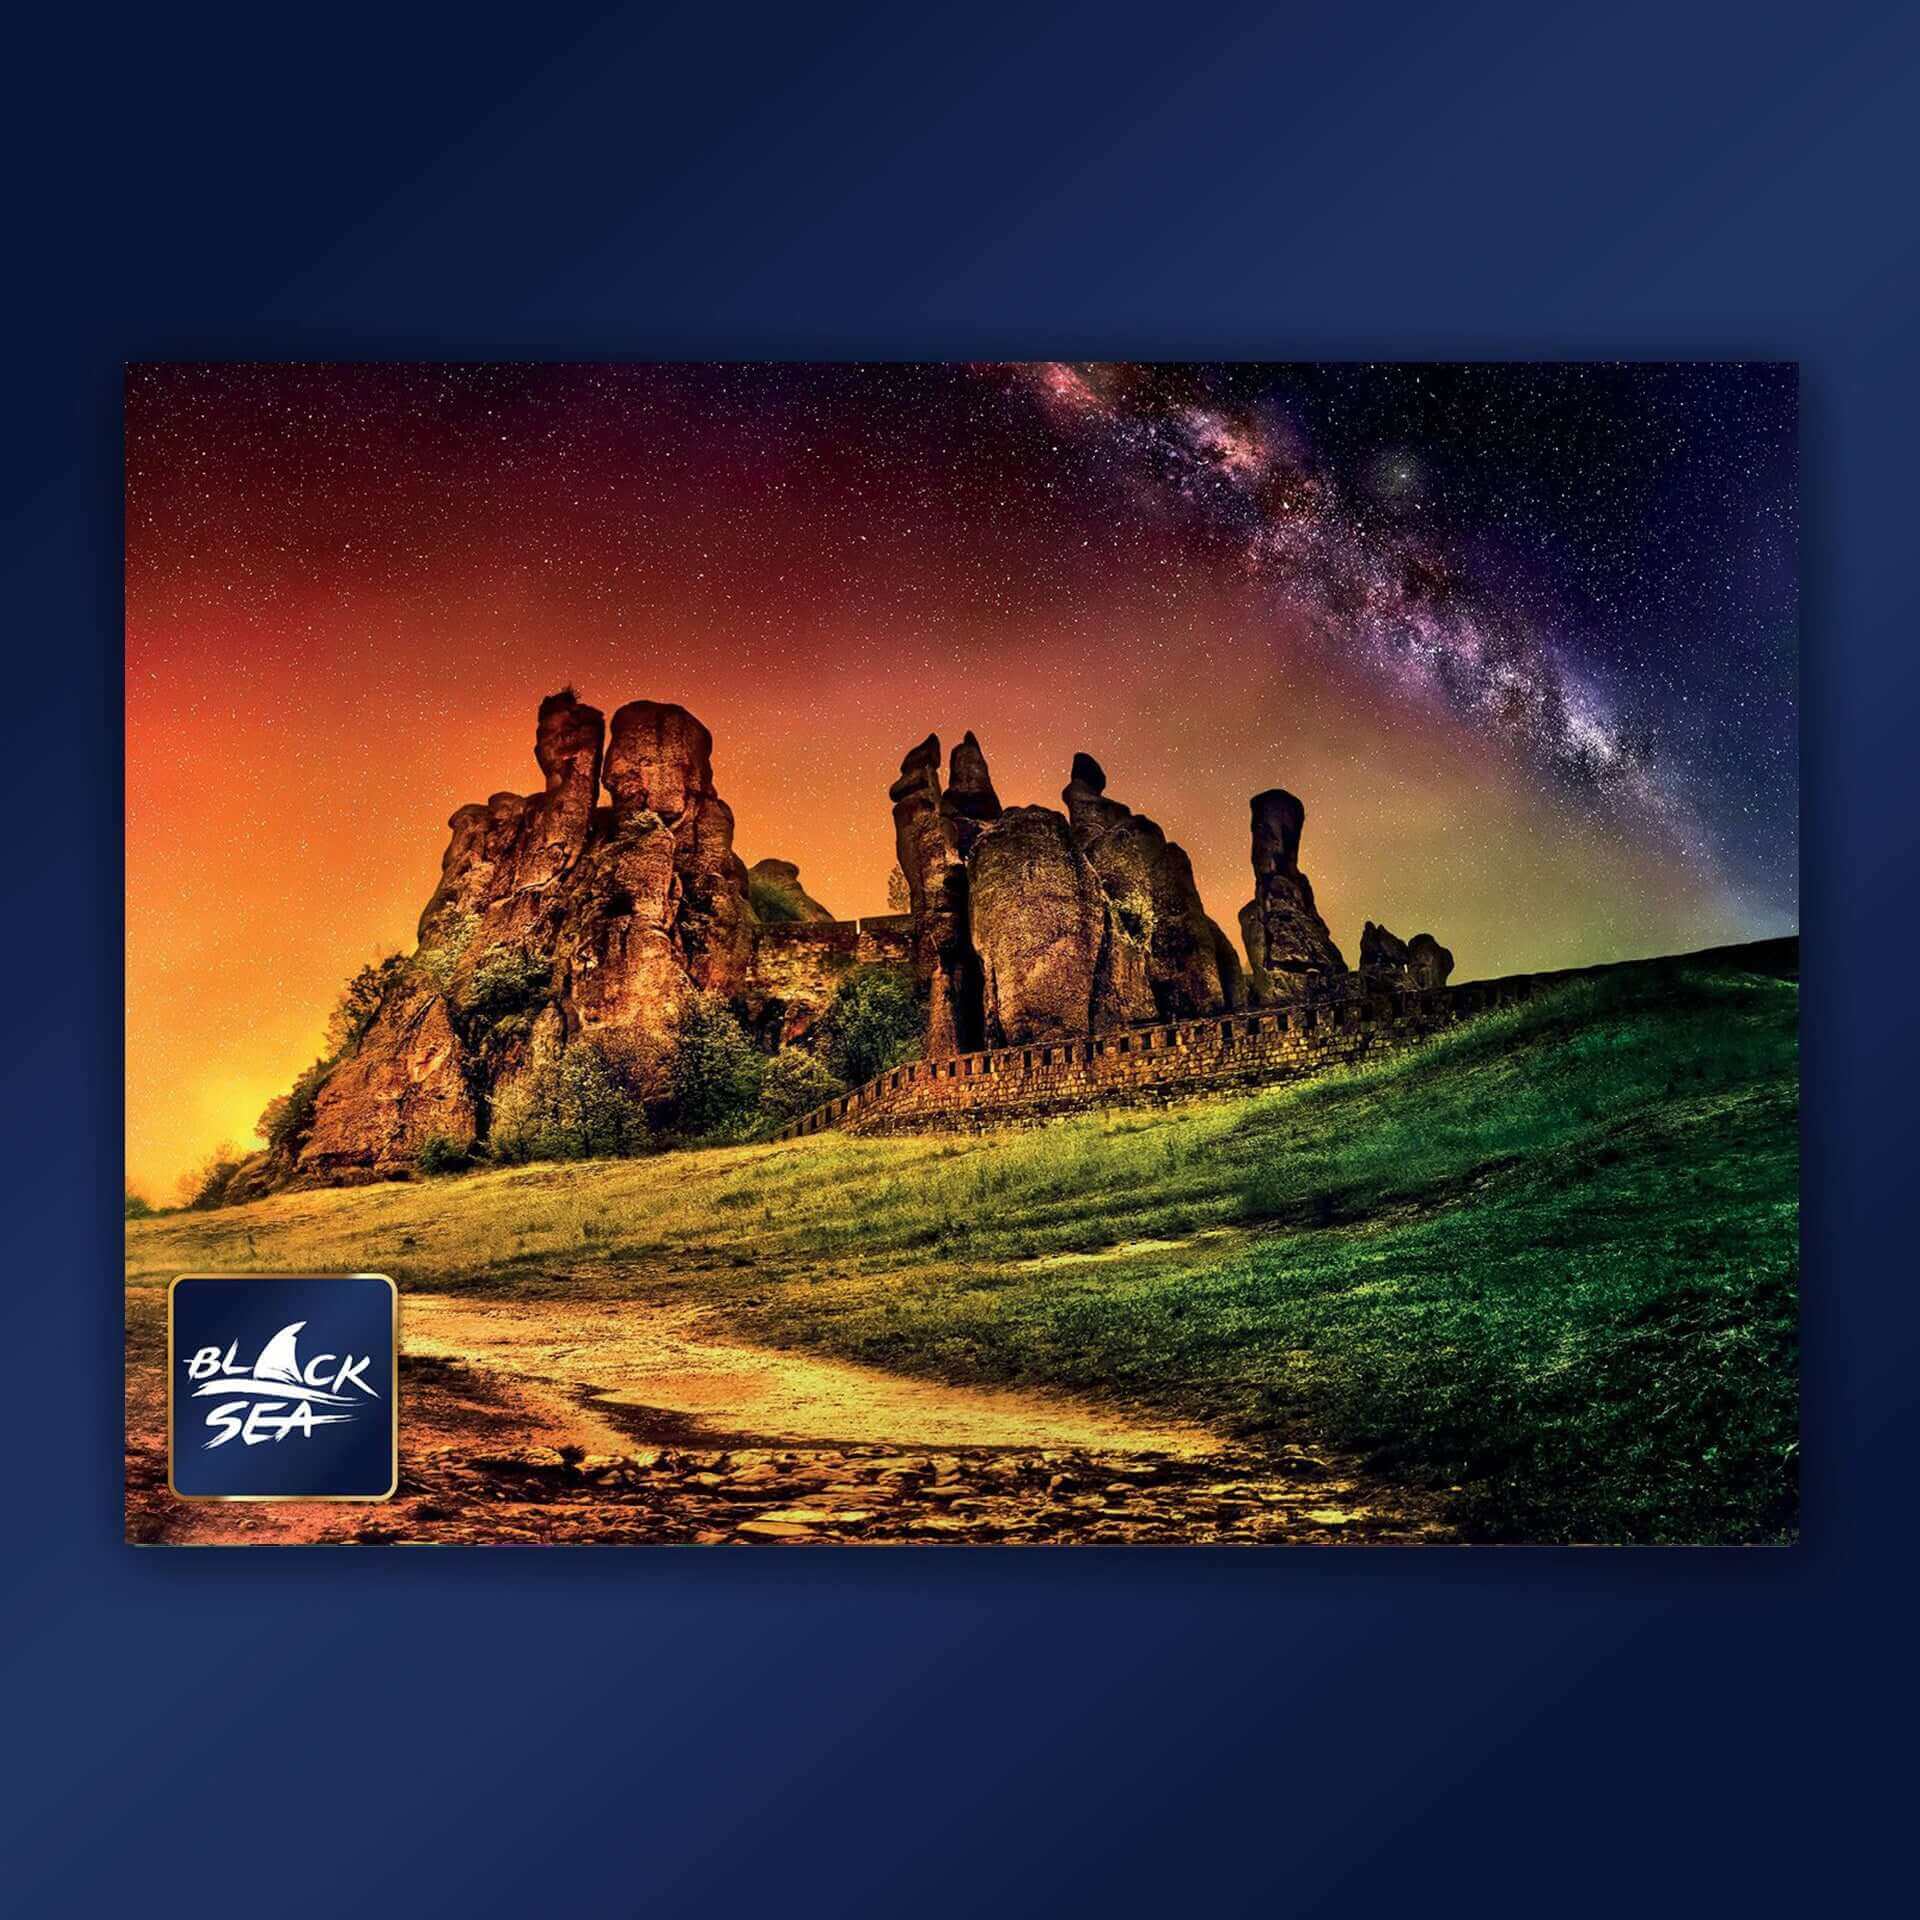 Puzzle Black Sea Premium 1000 pieces - The Belogradchik Rocks, The rock formations near the town of Belogradchik are among the most special natural phenomena in Bulgaria. They occupy an area about 30 km long, and 3 to 5 km wide, and they reach 200 metres